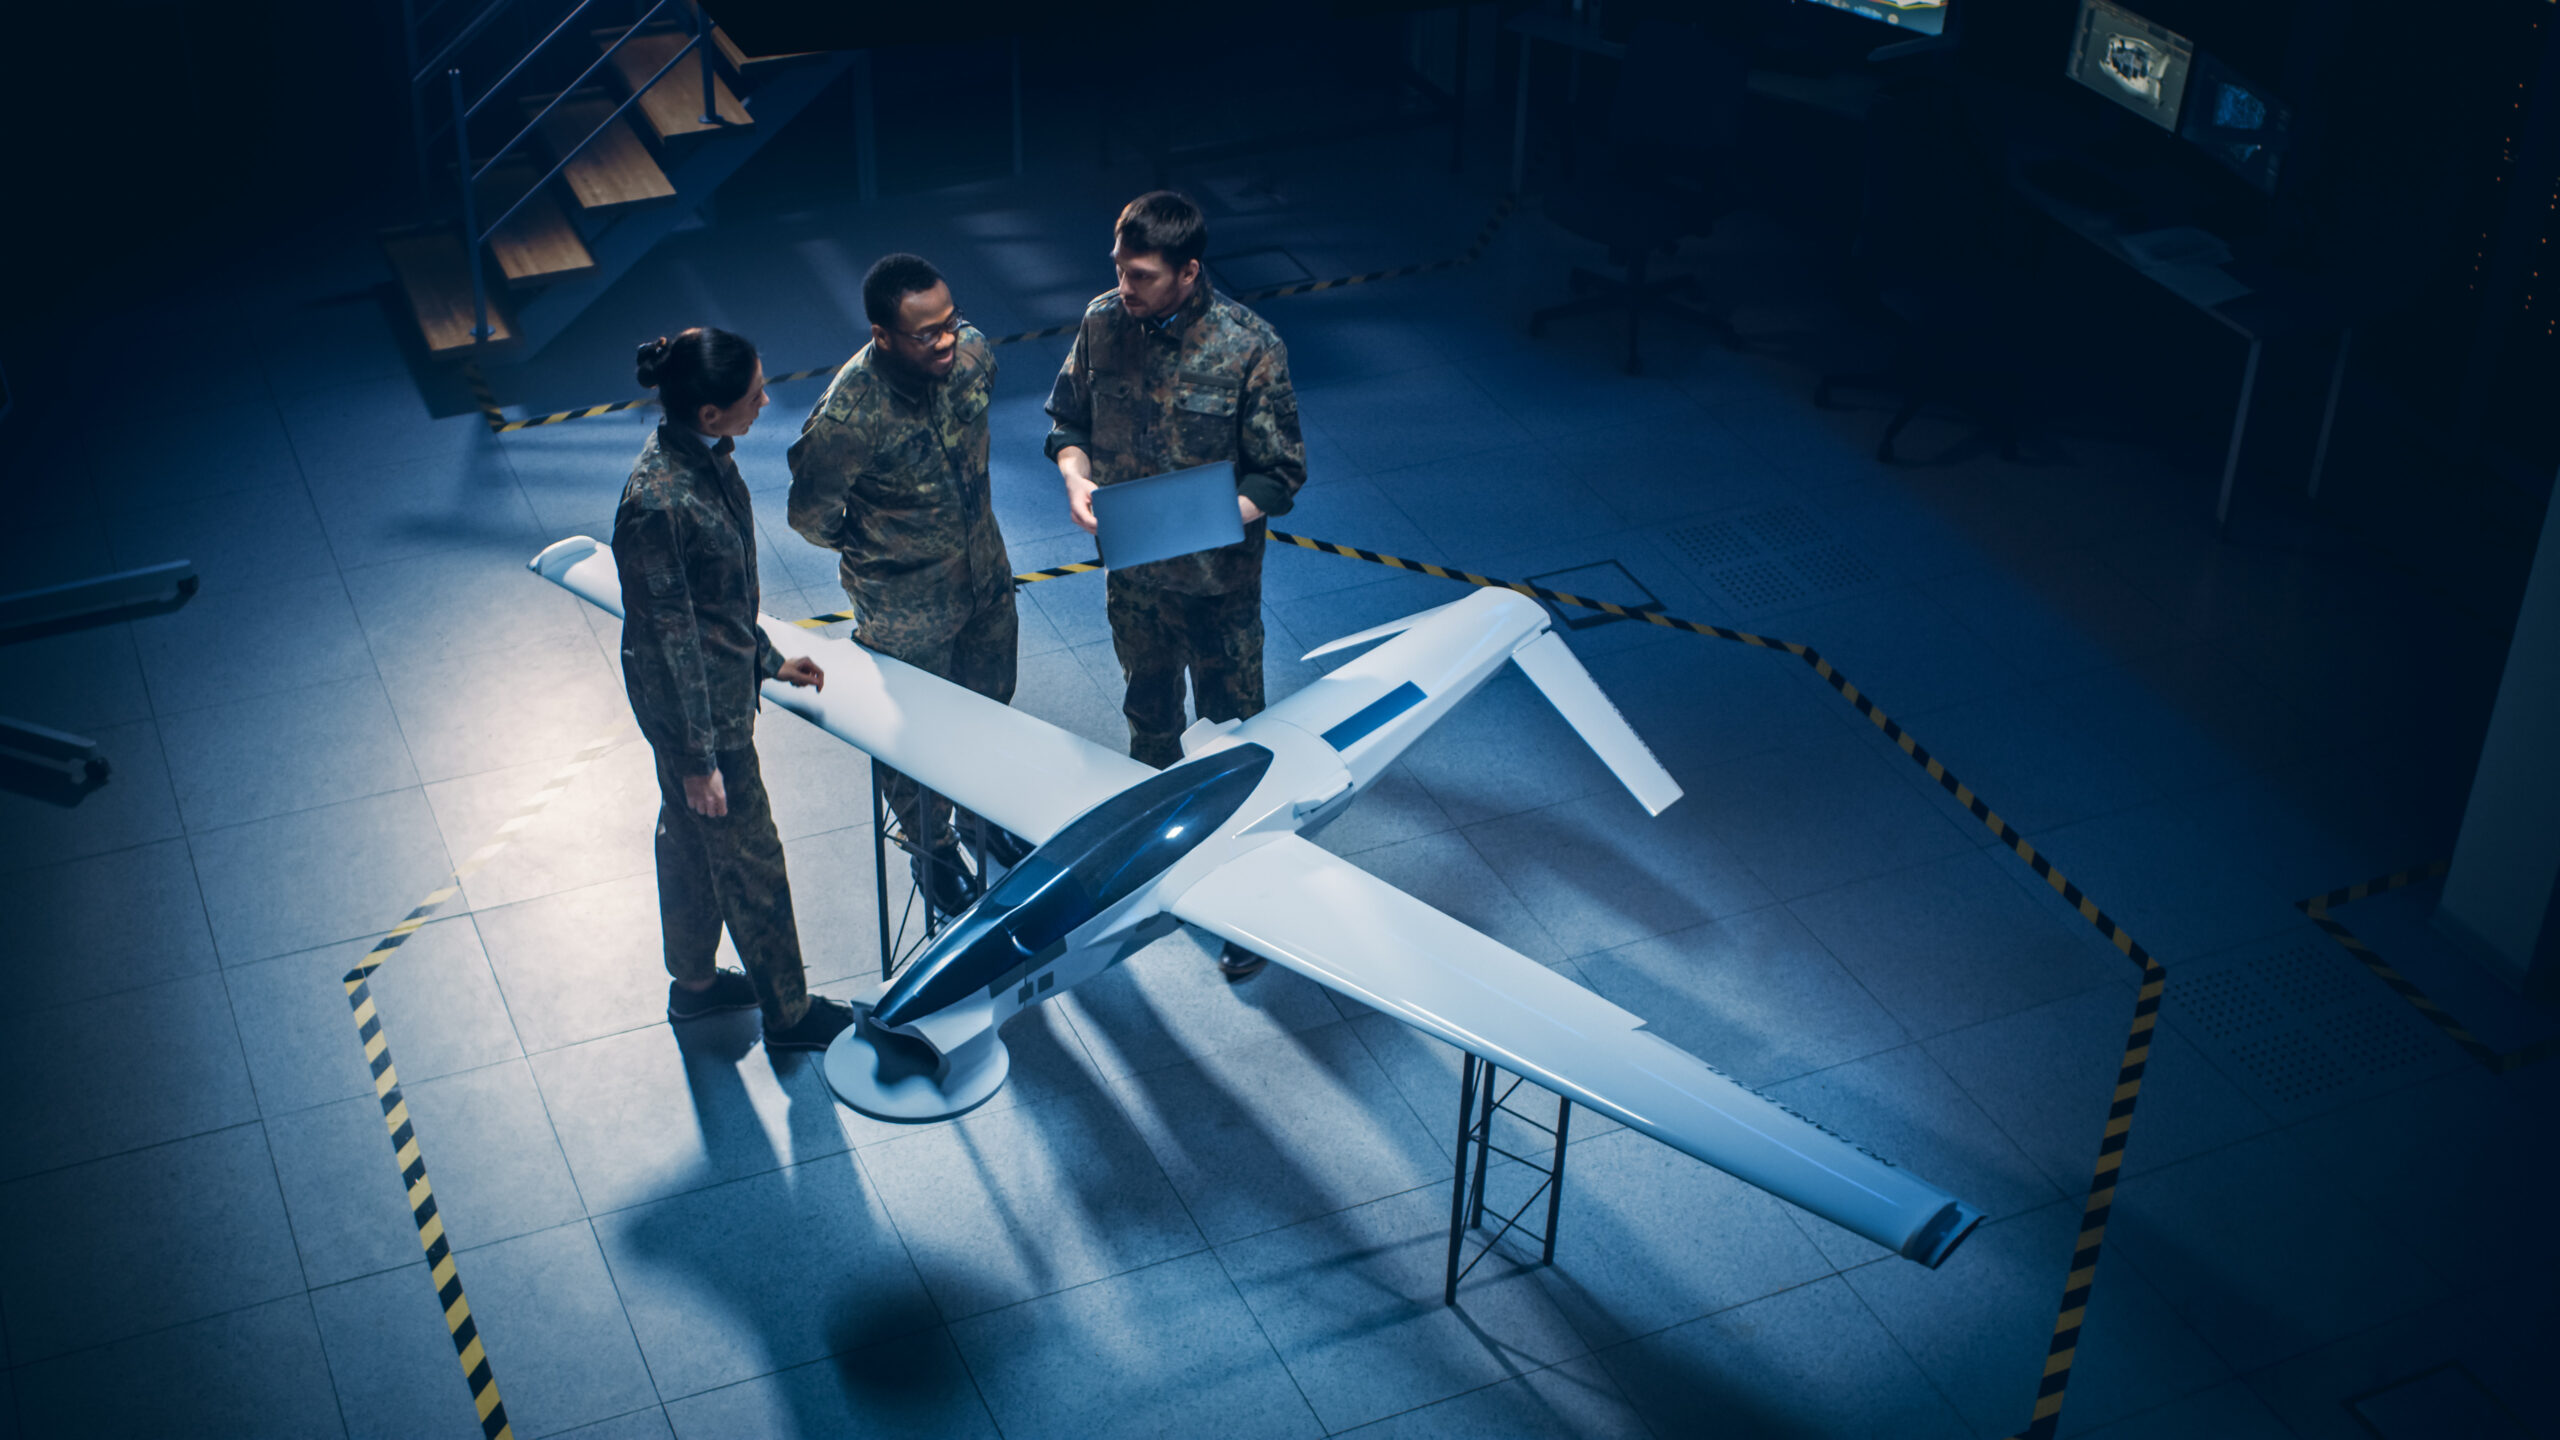 Army Aerospace Engineers Work On Unmanned Aerial Vehicle / Drone. Uniformed Aviation Experts Talk, Using Laptop. Industrial Facility with Aircraft for Performing Surveillance, Warfare Tactics, Attack